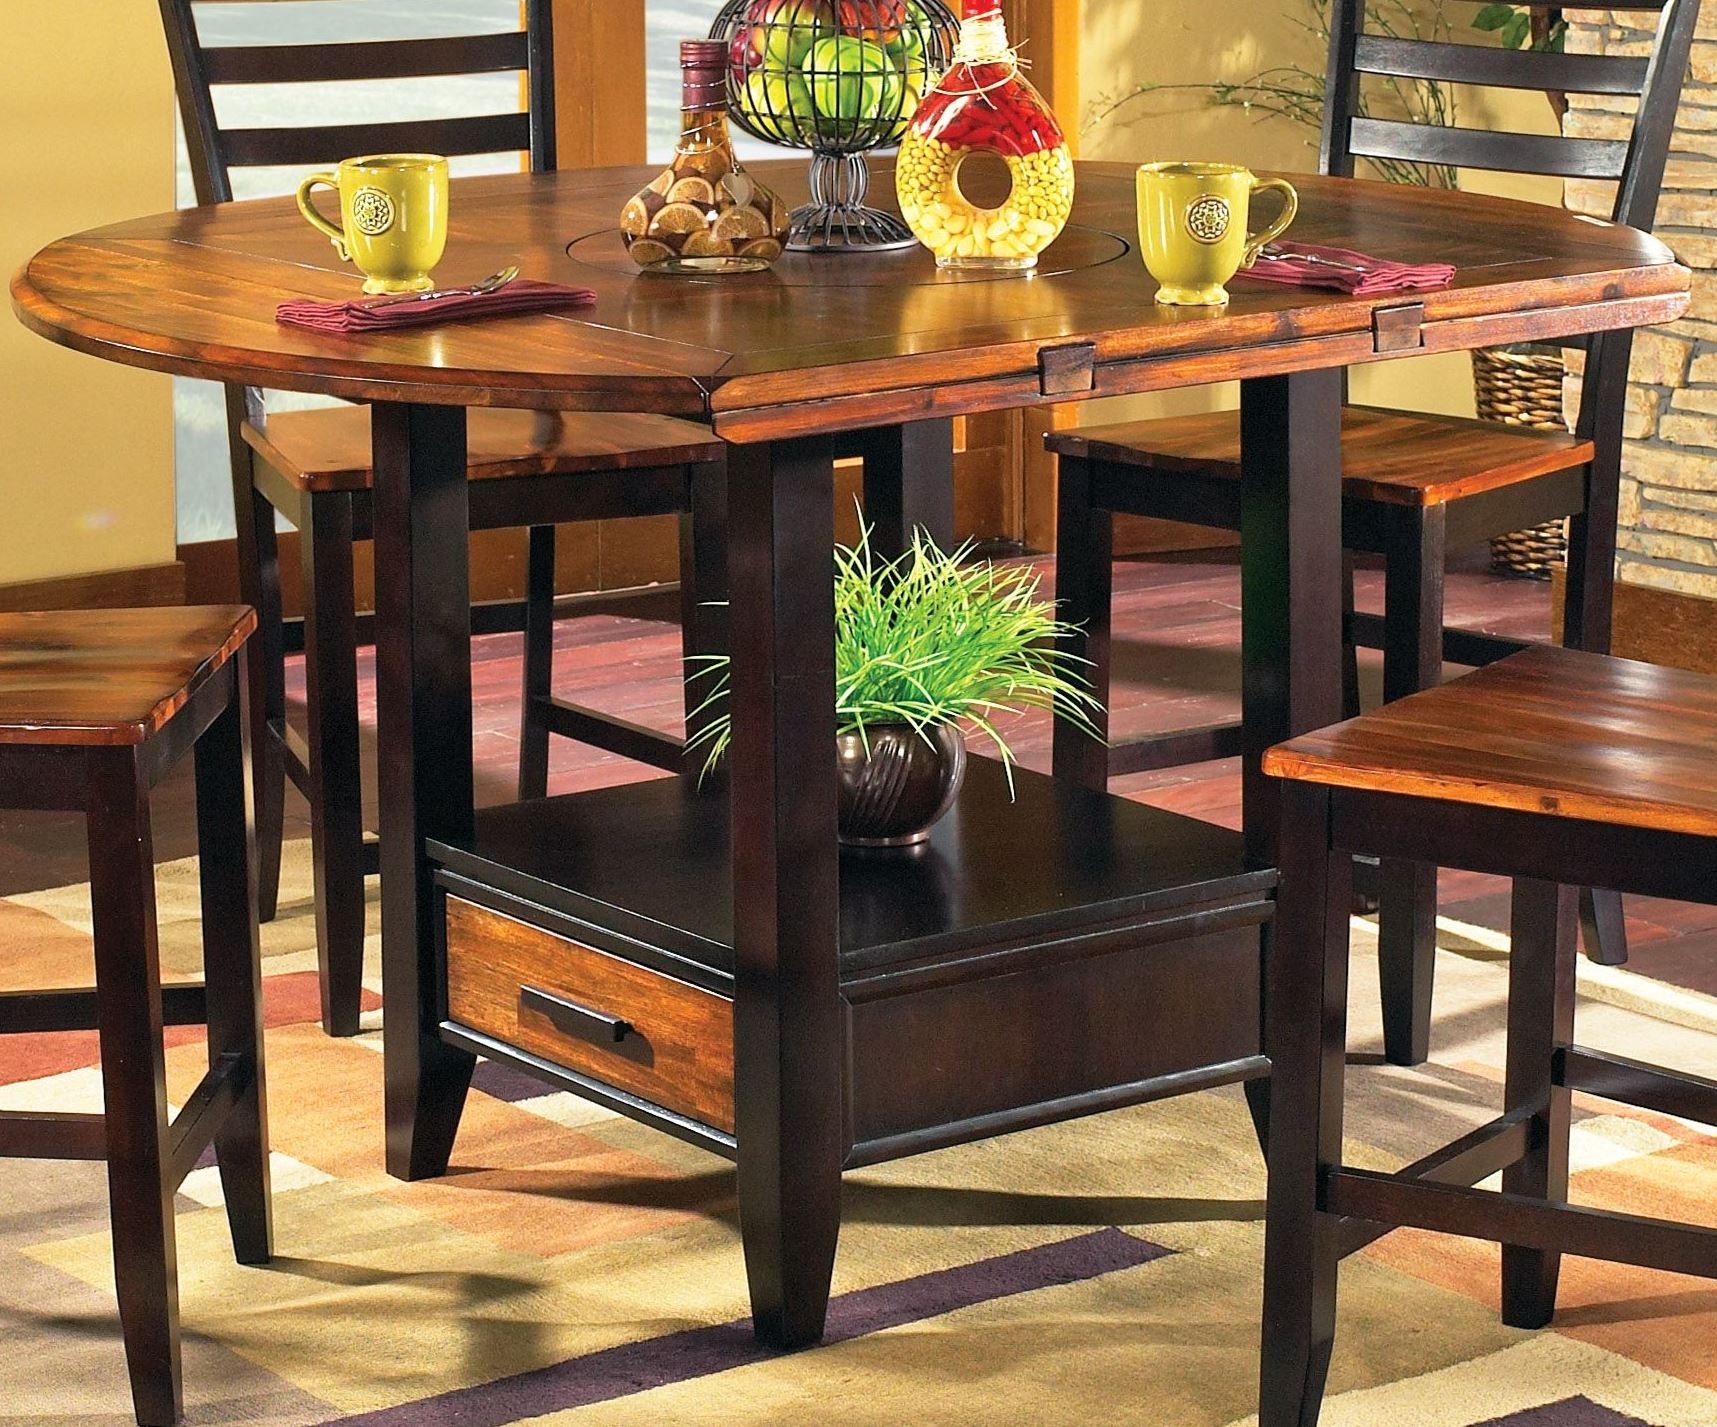 Bar height round dining table